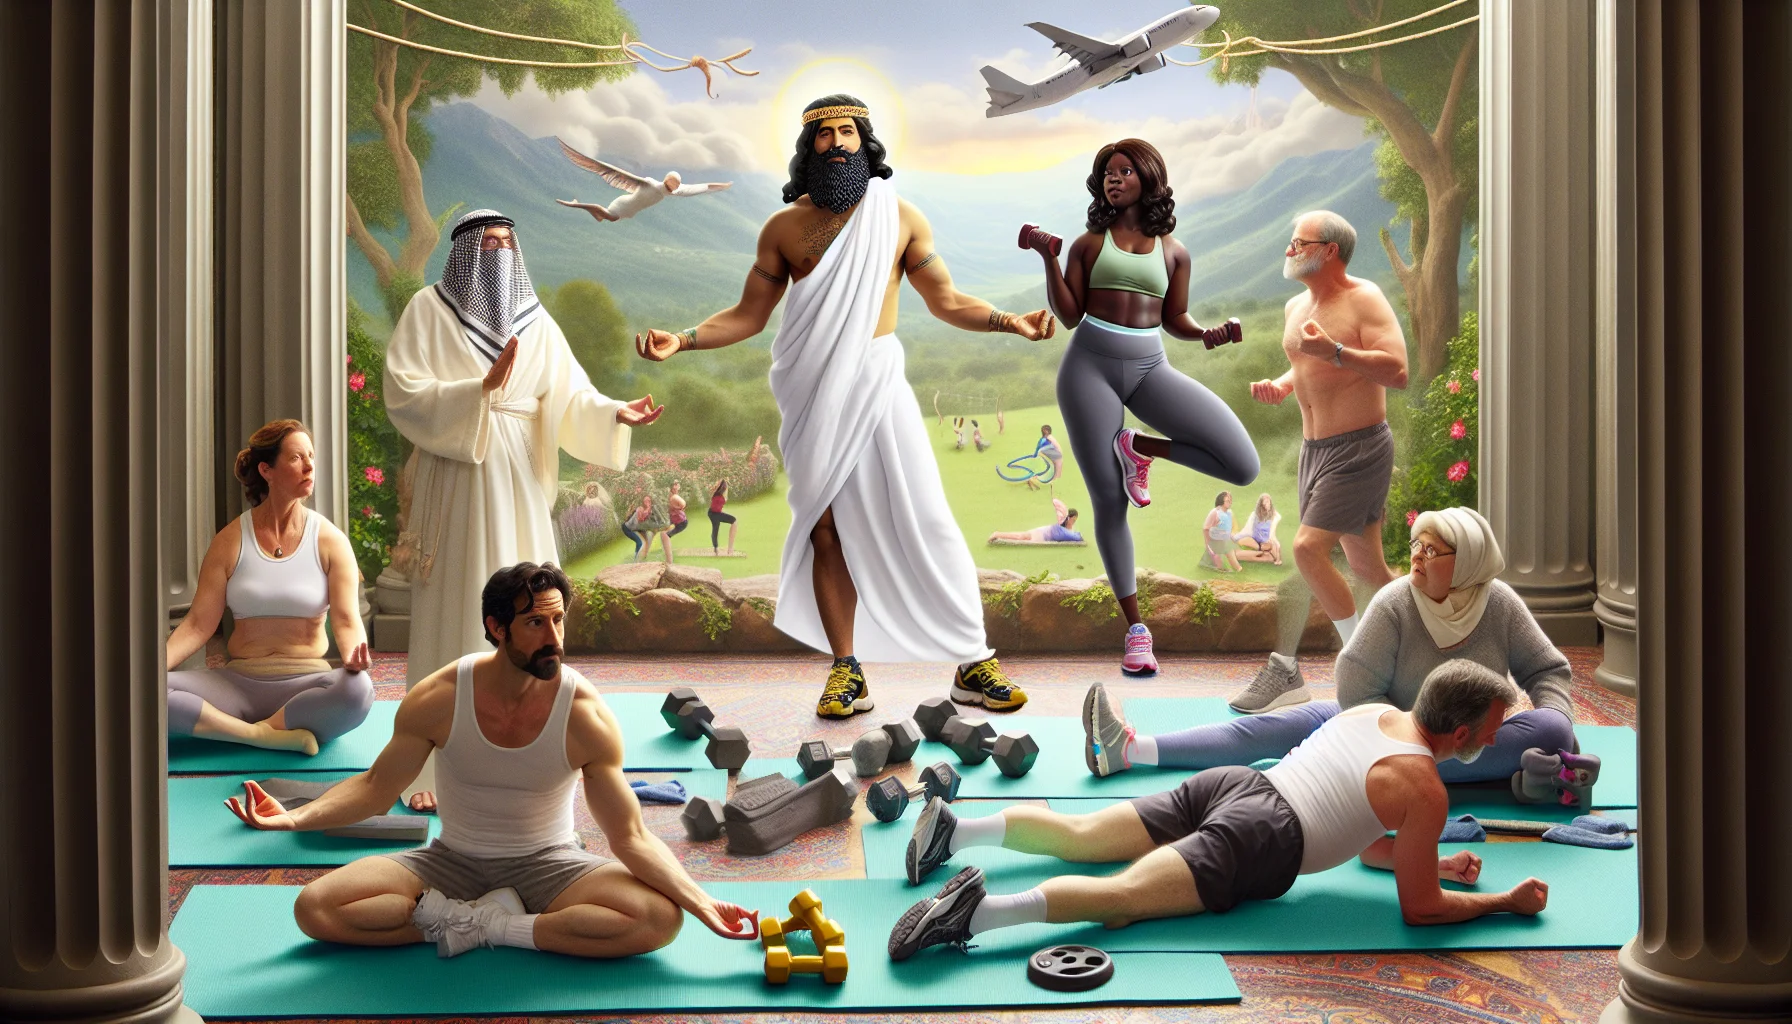 Create a spirit-lifting image showcasing a whimsical scene titled 'Holyland 12: Merging Faith and Wellness'. It features several individuals from various descents, namely a Hispanic man, a Black woman, a Middle-Eastern woman, and a White man. They are engaging in different forms of exercise, such as yoga, running, and weight-lifting, all in a tranquil and peaceful setting that exudes an aura of spiritual sacredness. A touch of humor is incorporated into the scene, possibly through the use of playful workout clothes, unusual exercise equipment, or lighthearted facial expressions on the participants.